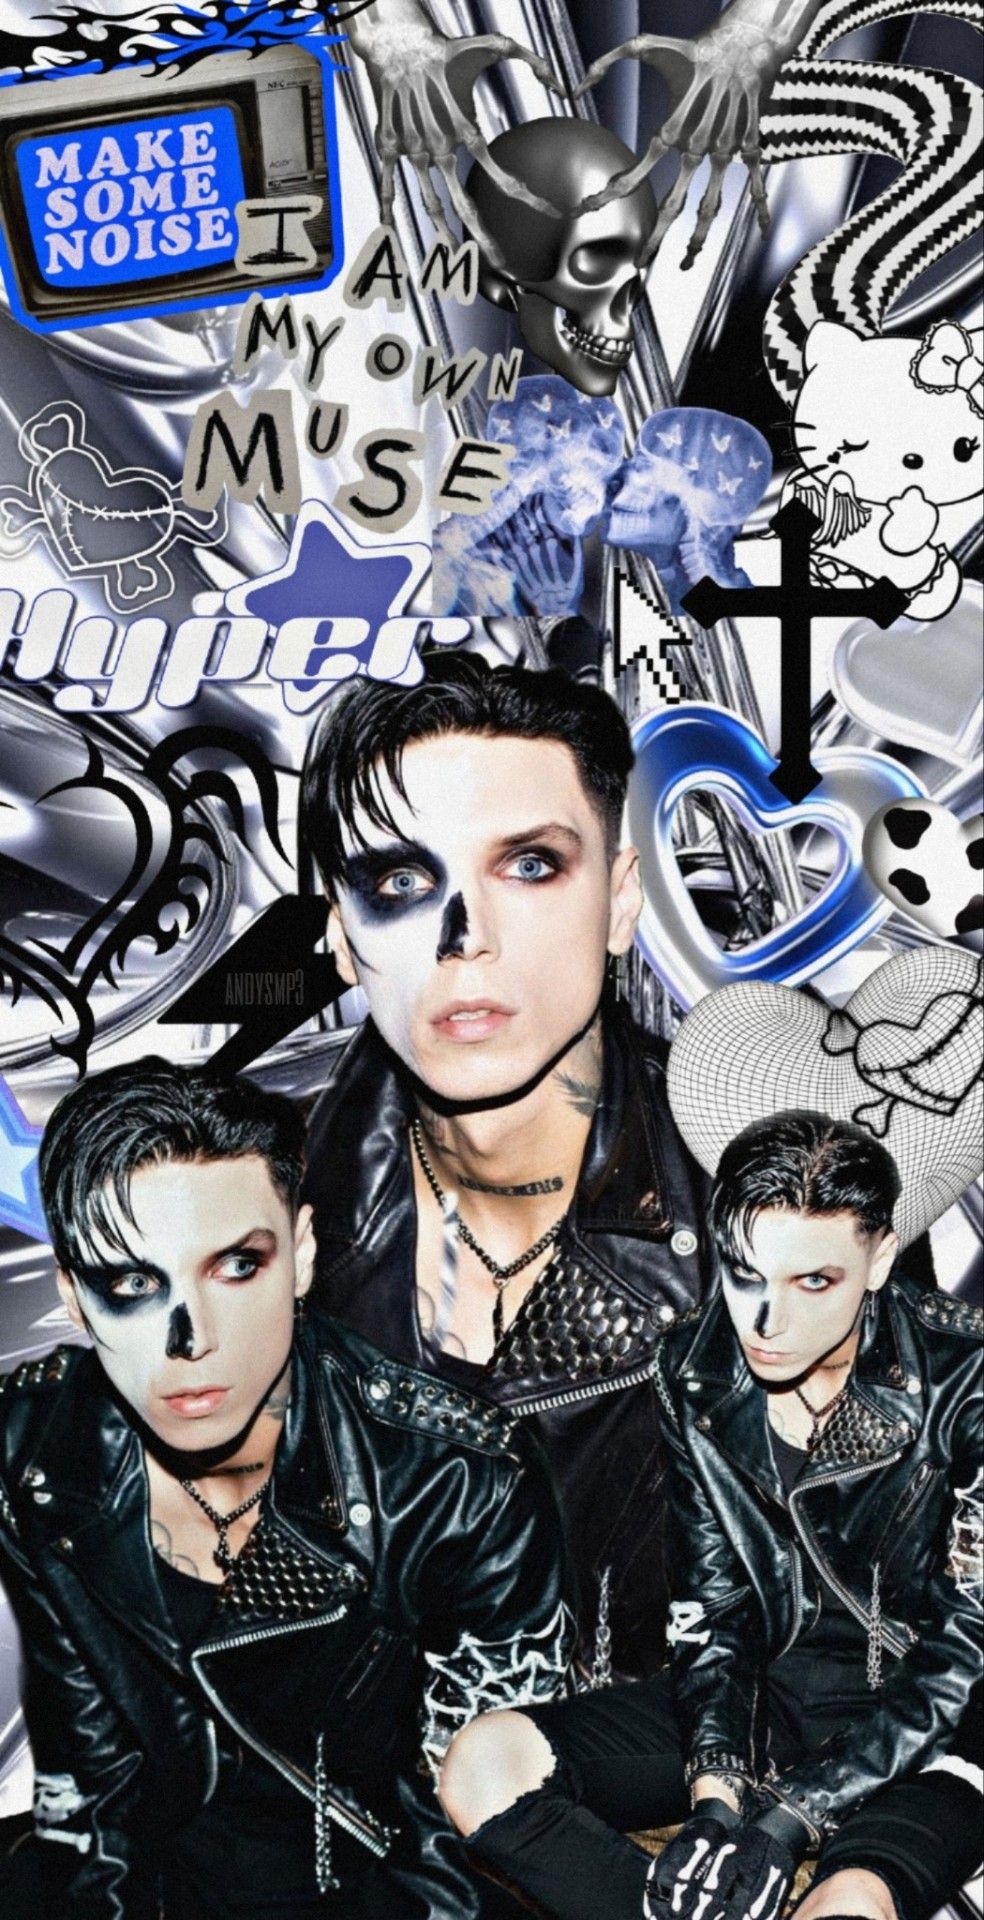 Andy Biersack iPhone Wallpaper with high-resolution 1080x1920 pixel. You can use this wallpaper for your iPhone 5, 6, 7, 8, X, XS, XR backgrounds, Mobile Screensaver, or iPad Lock Screen - Y2K, punk